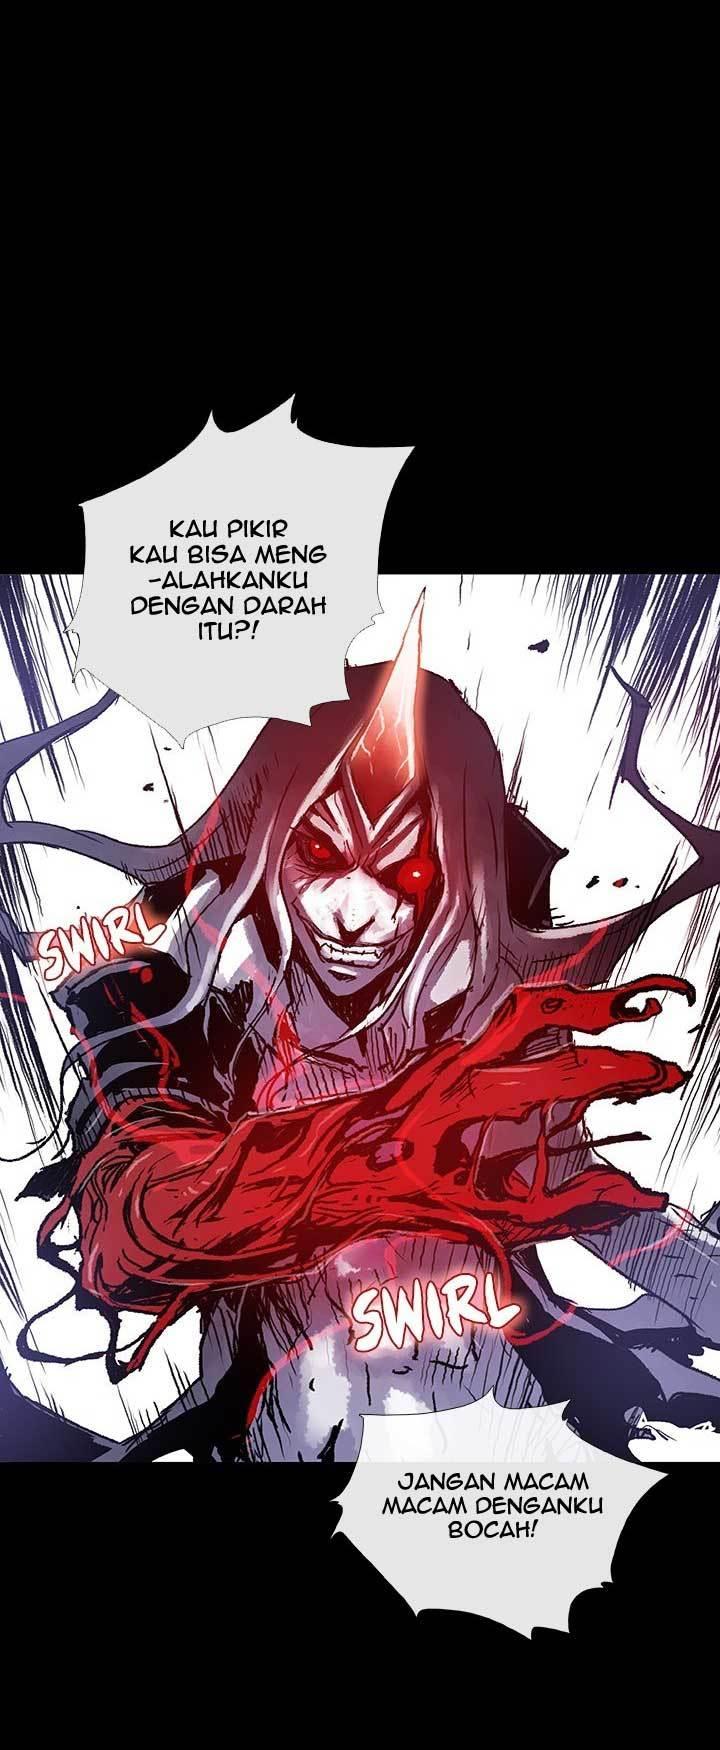 Blood Blade Chapter 4